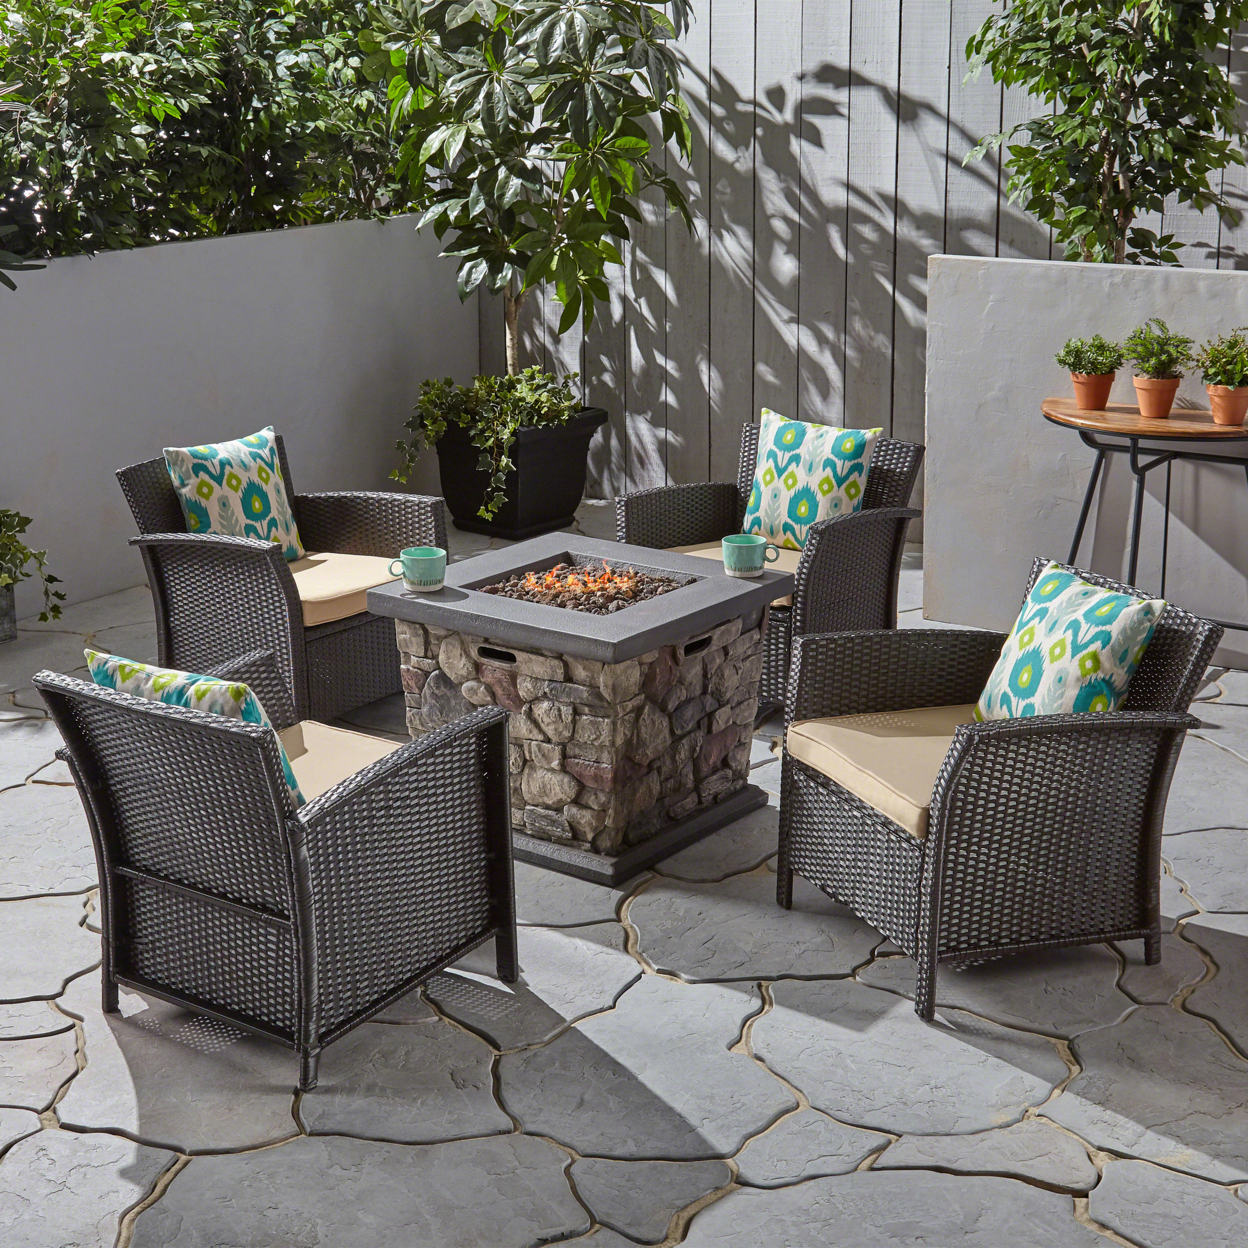 Abigail Outdoor 4 Piece Wicker Club Chair Chat Set With Fire Pit - Brown + Tan + Stone